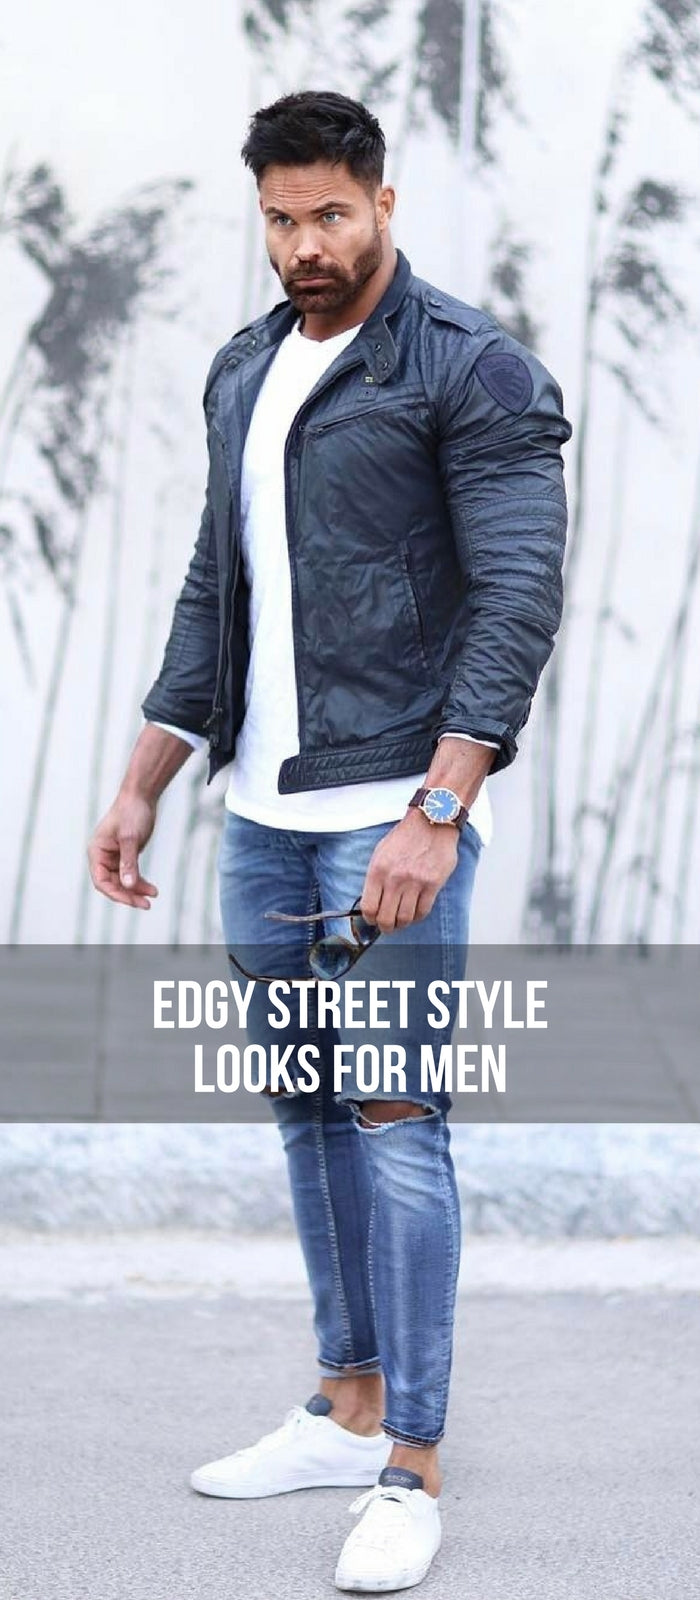 16 Cool Street Style Looks For Men – LIFESTYLE BY PS